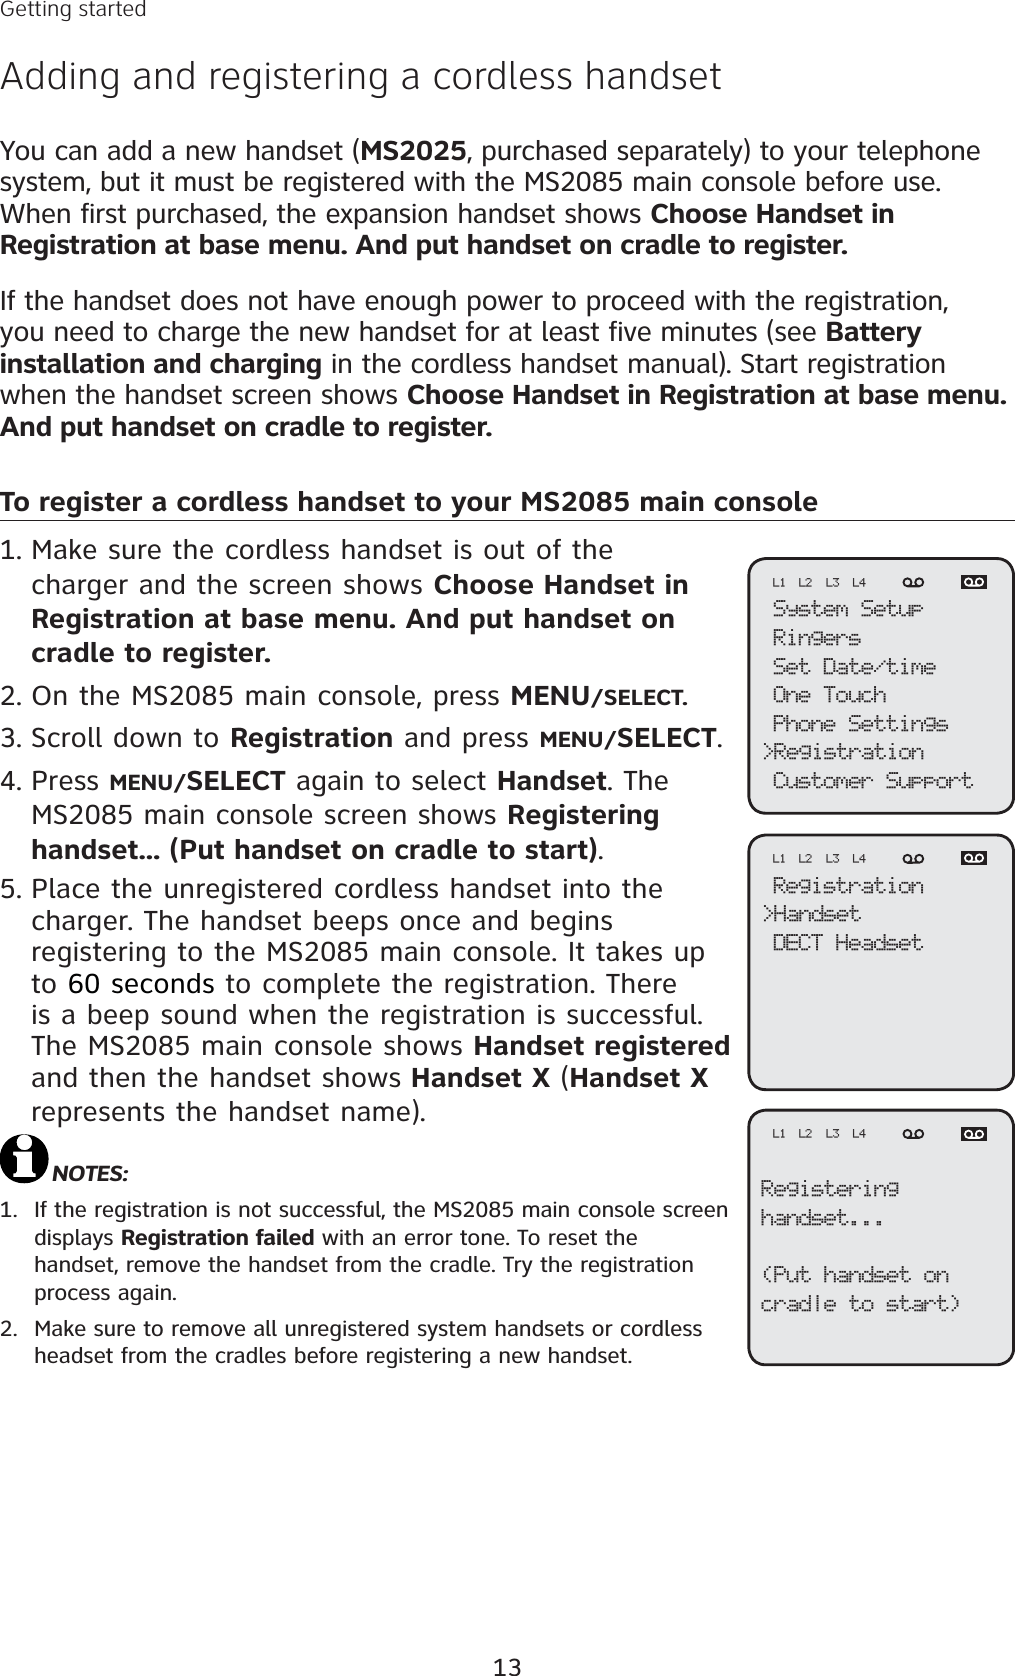 13Getting startedAdding and registering a cordless handsetYou can add a new handset (MS2025, purchased separately) to your telephone system, but it must be registered with the MS2085 main console before use. When first purchased, the expansion handset shows Choose Handset in Registration at base menu. And put handset on cradle to register. If the handset does not have enough power to proceed with the registration, you need to charge the new handset for at least five minutes (see Battery installation and charging in the cordless handset manual). Start registration when the handset screen shows Choose Handset in Registration at base menu.And put handset on cradle to register. To register a cordless handset to your MS2085 main consoleMake sure the cordless handset is out of the charger and the screen shows Choose Handset inRegistration at base menu. And put handset oncradle to register.On the MS2085 main console, press MENU/SELECT.Scroll down to Registration and press MENU/SELECT.Press MENU/SELECT again to select Handset. The MS2085 main console screen shows Registering handset... (Put handset on cradle to start).Place the unregistered cordless handset into the charger. The handset beeps once and begins registering to the MS2085 main console. It takes up to 60 seconds to complete the registration. There is a beep sound when the registration is successful. The MS2085 main console shows Handset registered and then the handset shows Handset X (Handset Xrepresents the handset name). NOTES:If the registration is not successful, the MS2085 main console screen displays Registration failed with an error tone. To reset the handset, remove the handset from the cradle. Try the registration process again. Make sure to remove all unregistered system handsets or cordless headset from the cradles before registering a new handset. 1.2.3.4.5.1.2.System SetupRingersSet Date/timeOne TouchPhone Settings&gt;RegistrationCustomer SupportL1 L2 L3 L4Registration&gt;HandsetDECT HeadsetL1 L2 L3 L4Registeringhandset...(Put handset oncradle to start)L1 L2 L3 L4